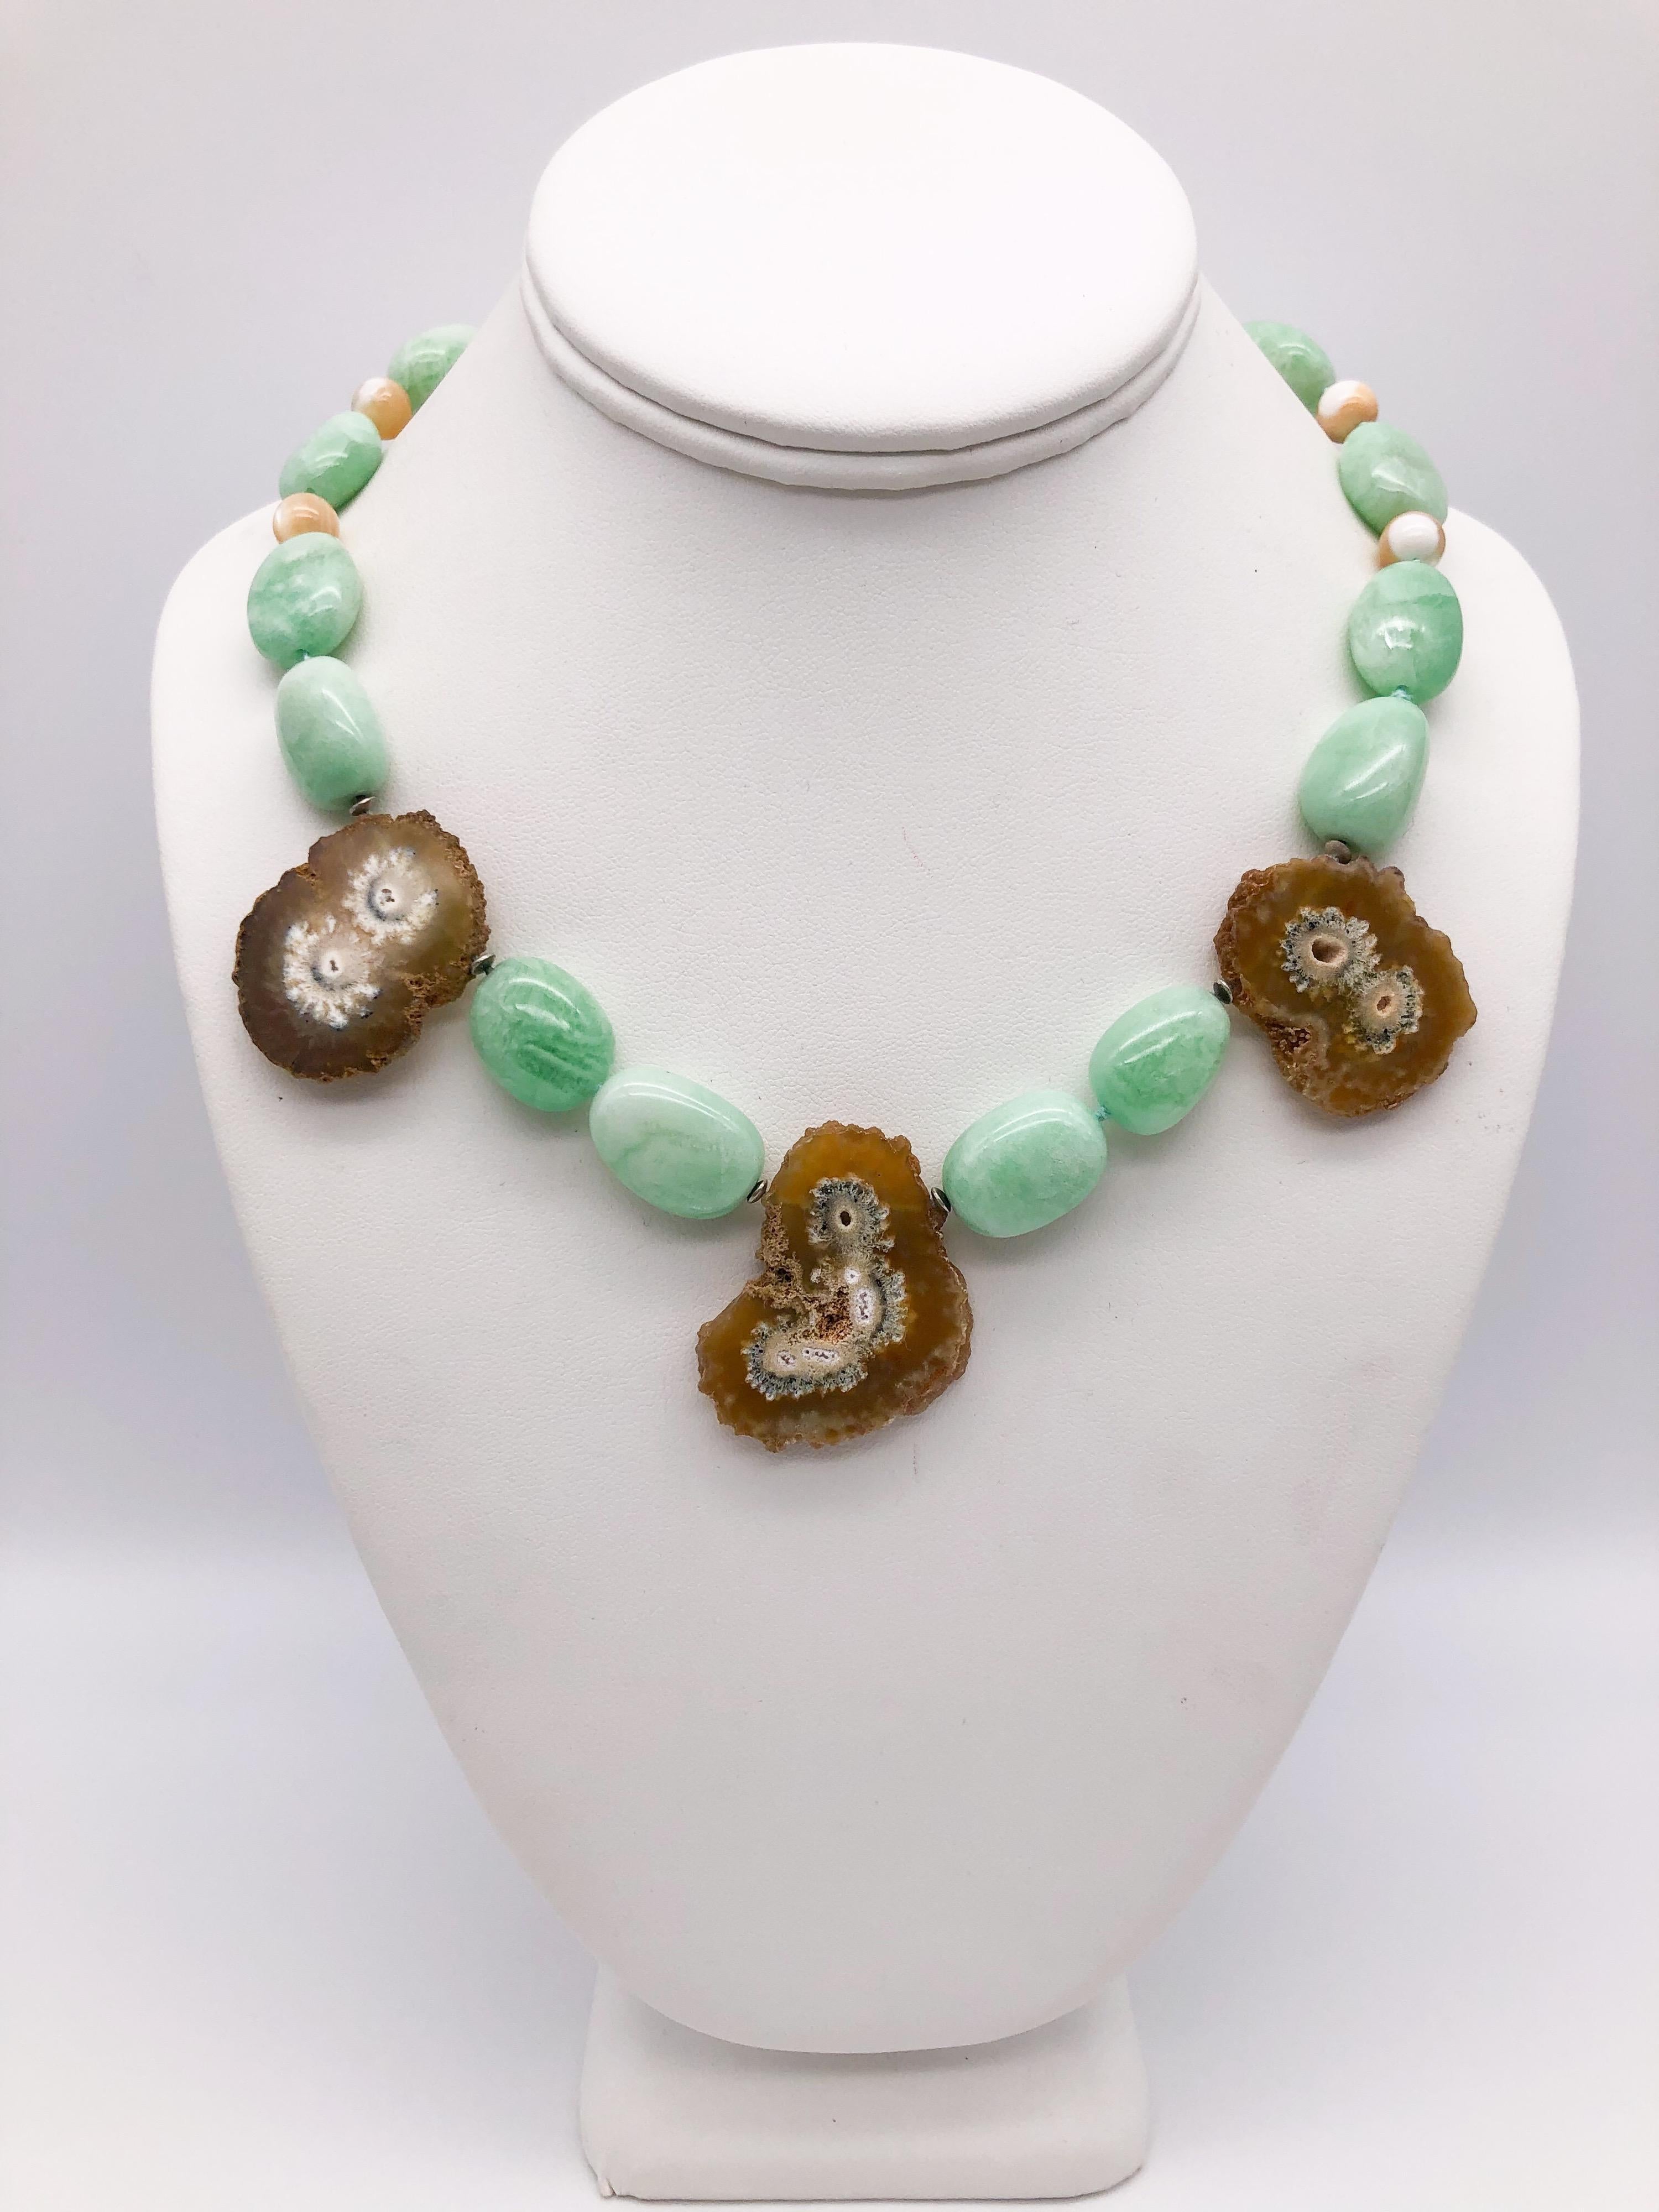 One-of-a-Kind
Soft as springtime pale green polished Amazonite nuggets pick up the tone of the green in the middle of each geode. The 3 geode slices appear to blossom between the beads. The small beads are moonstone, repeating the soft beige of the